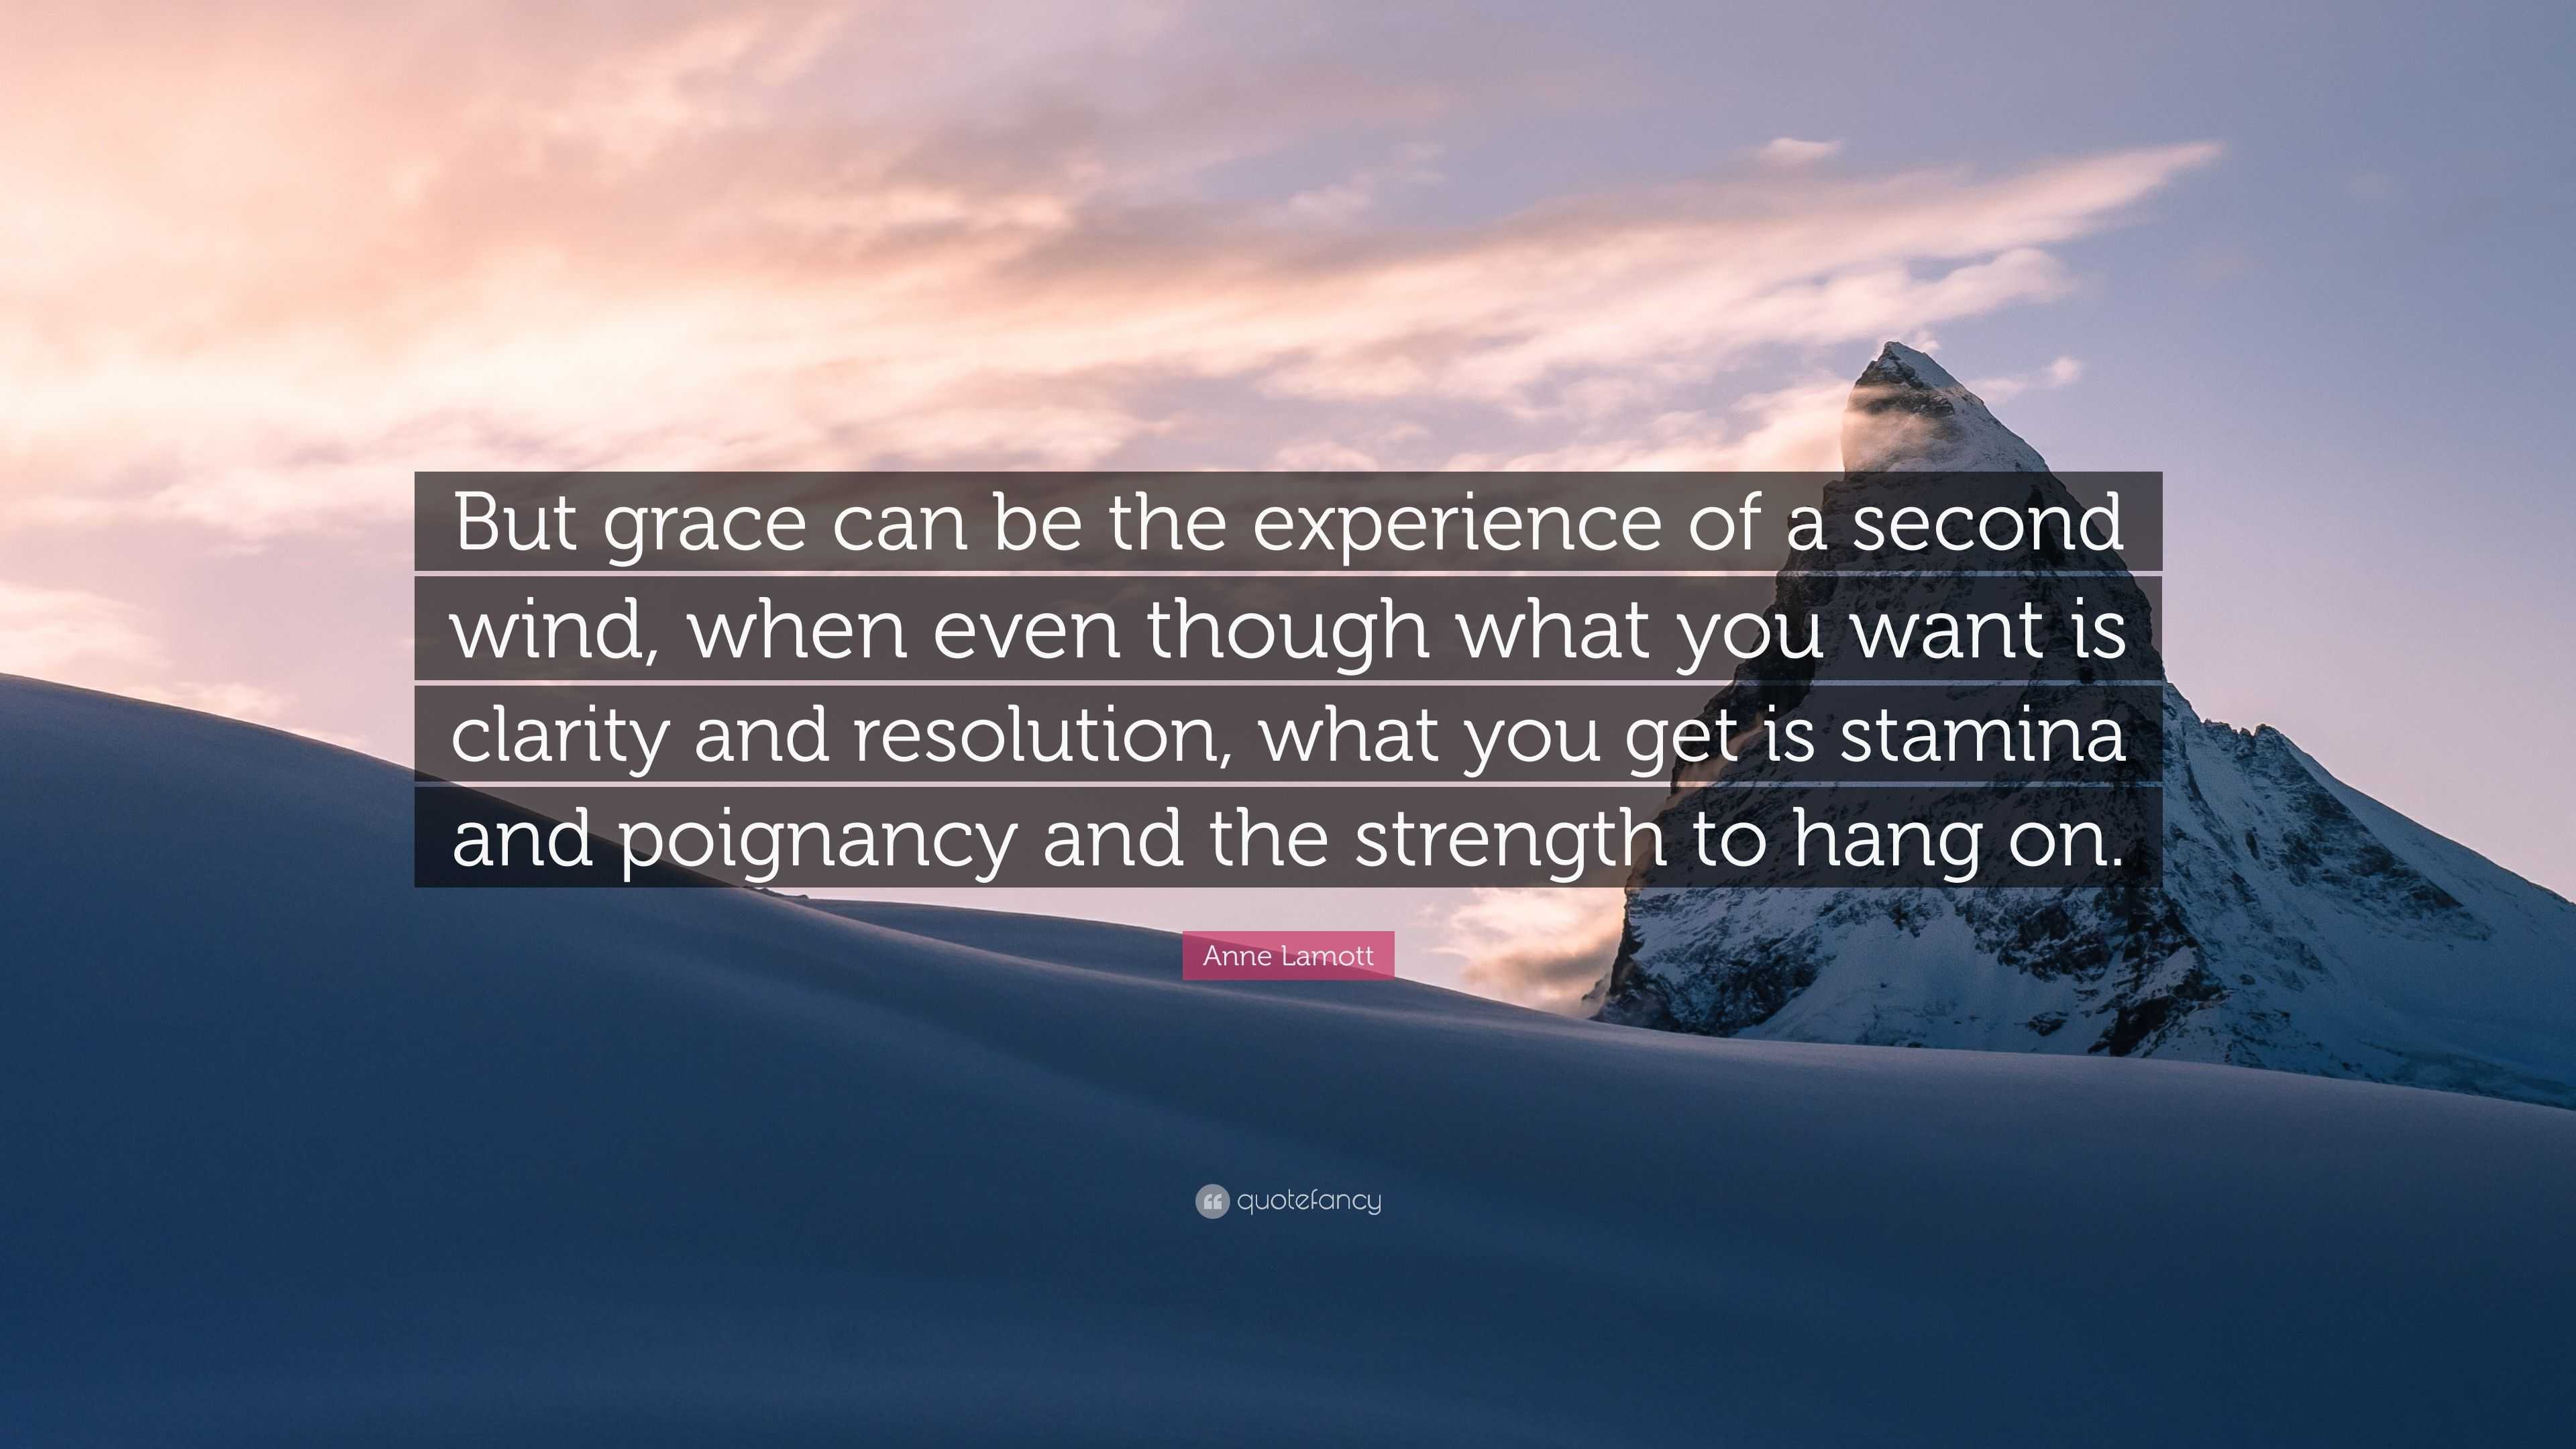 2503339 Anne Lamott Quote But grace can be the experience of a second wind